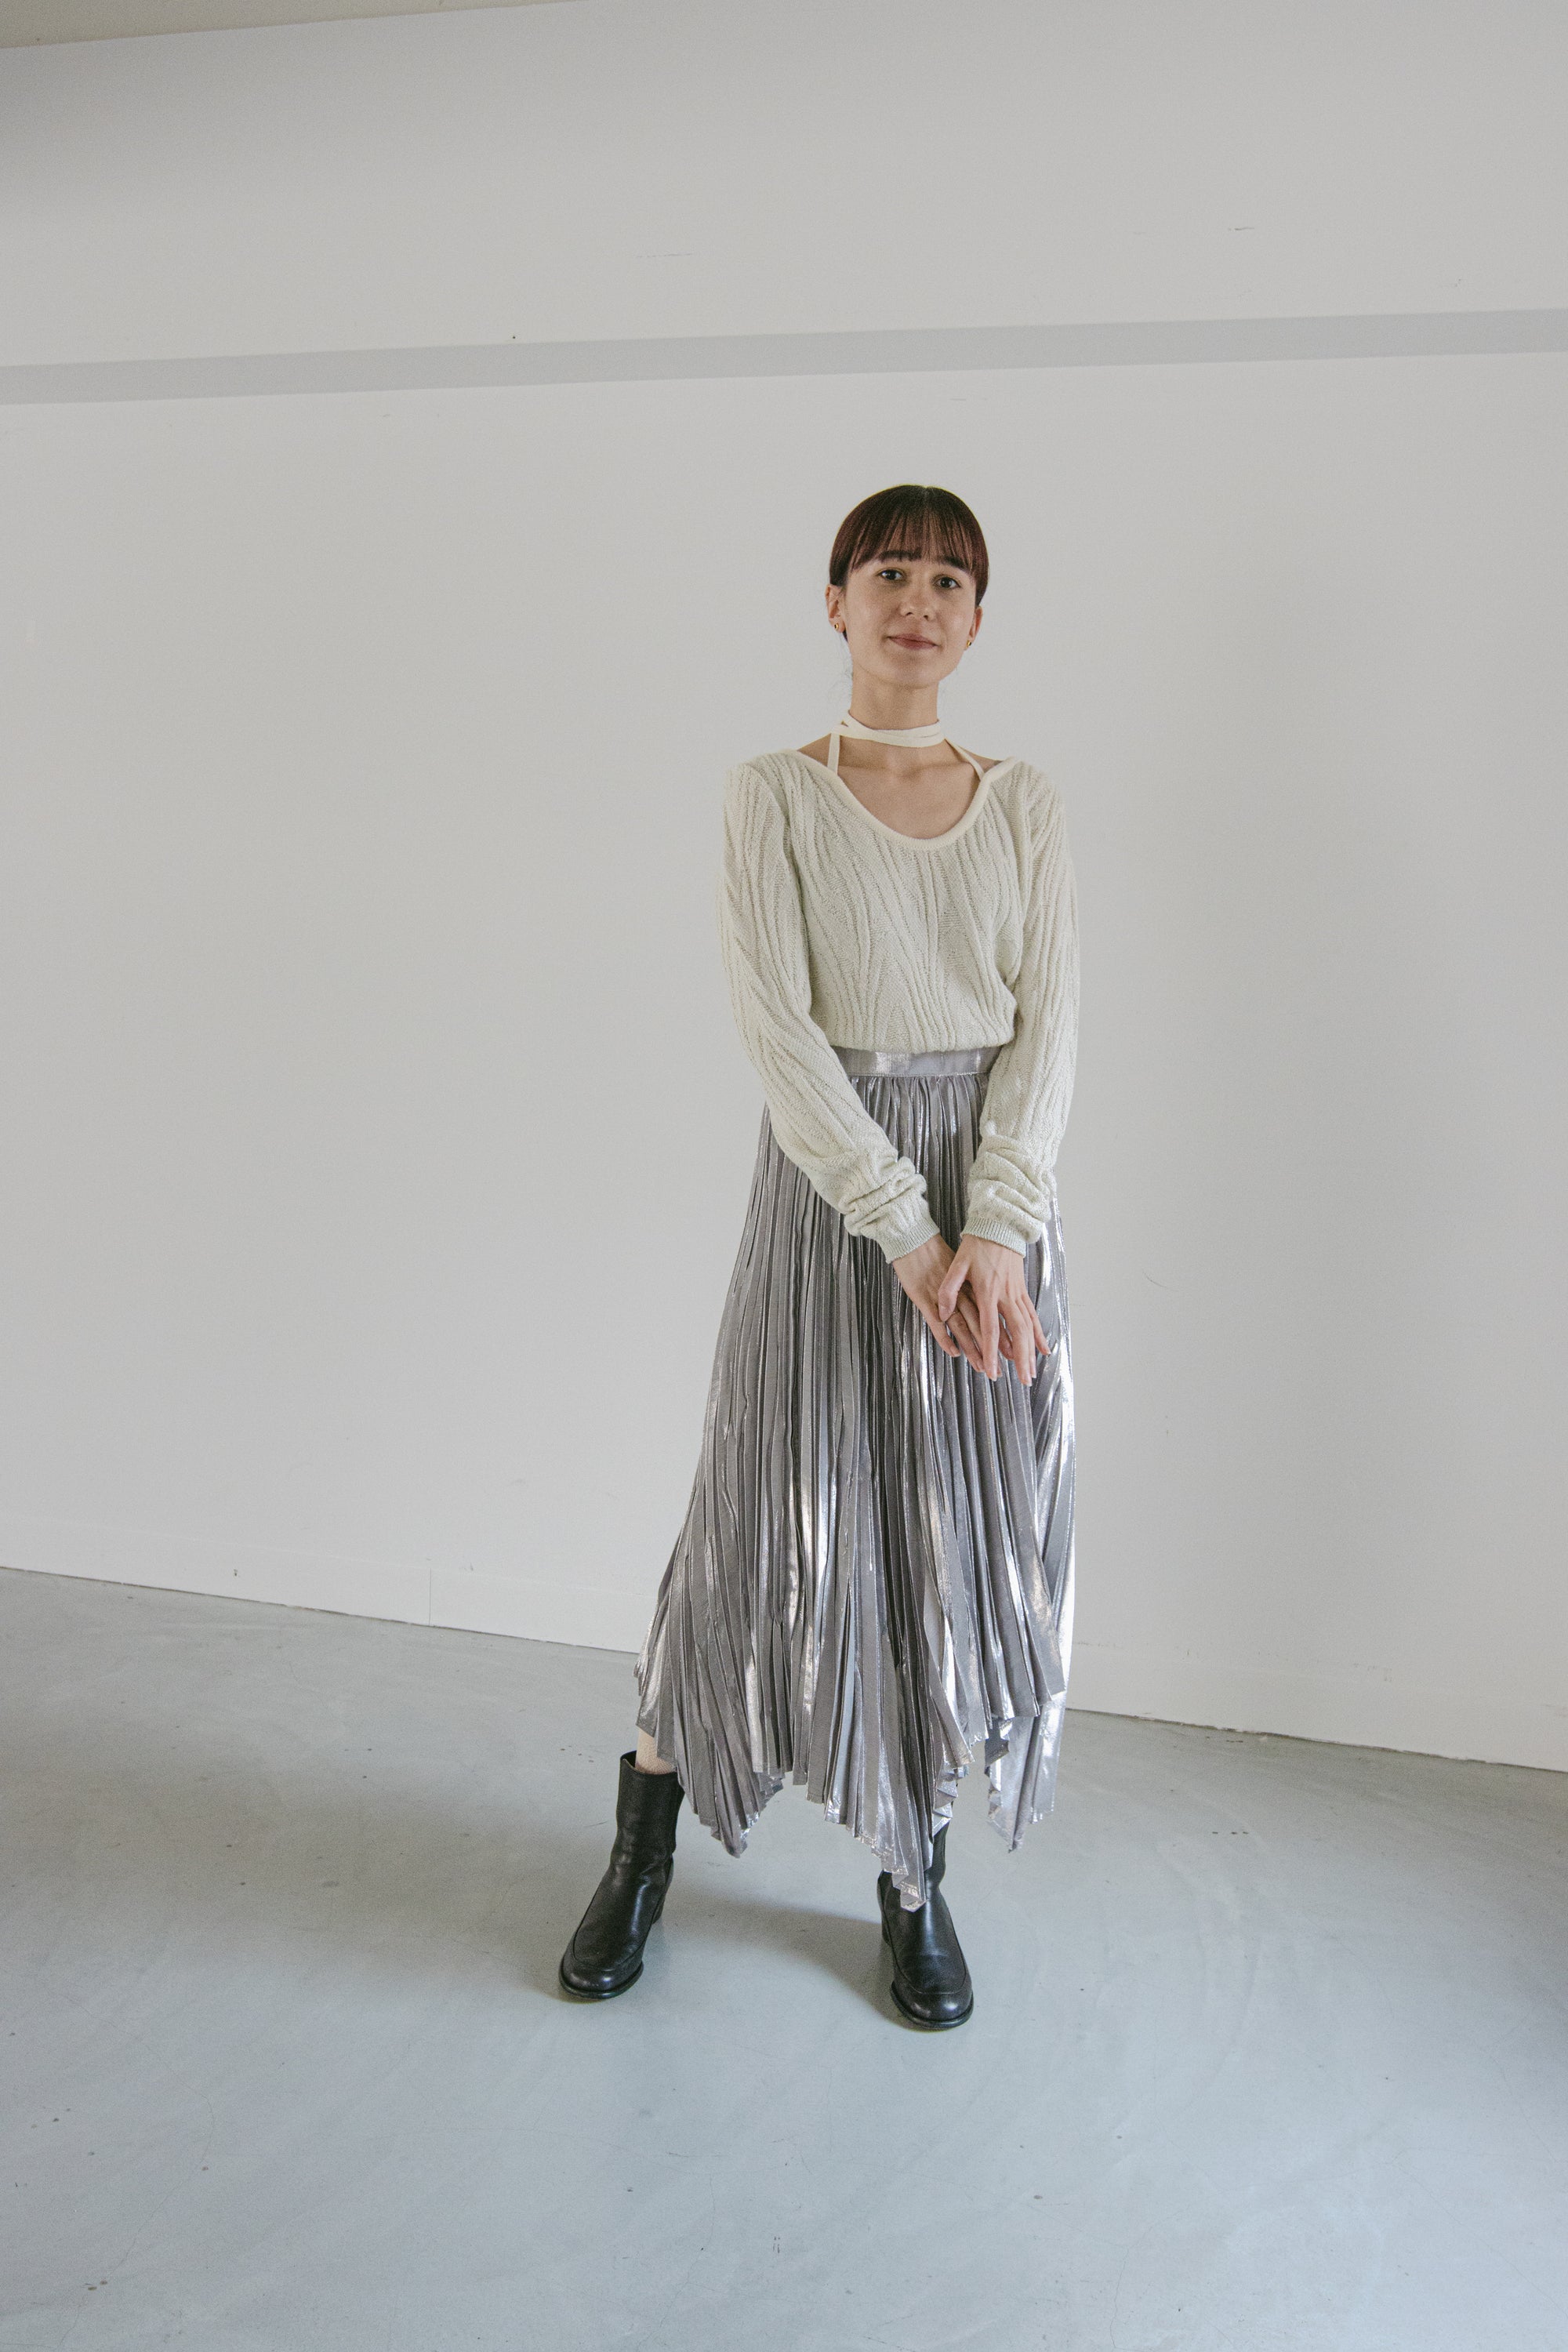 MURRAL Frost pleated skirt (Gold)